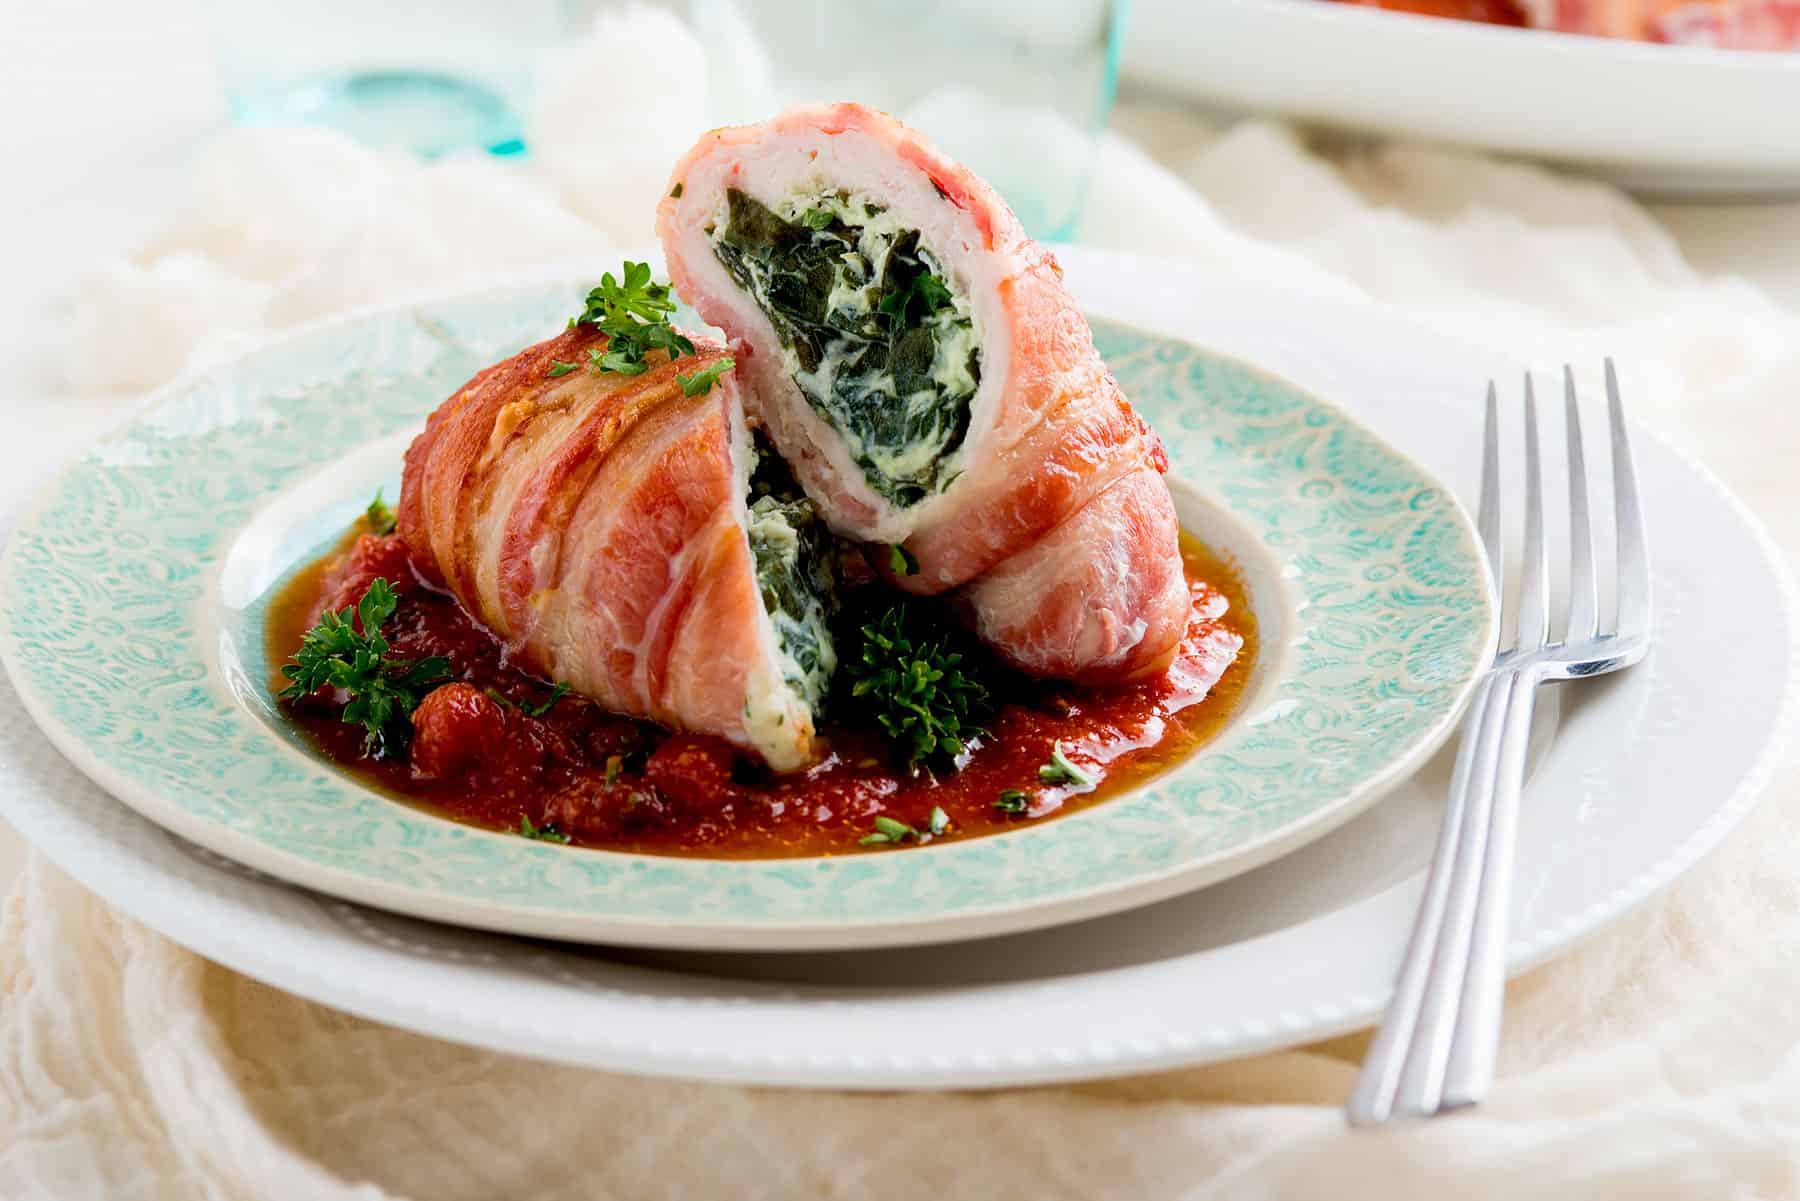 Bacon-wrapped chicken breast rolls.